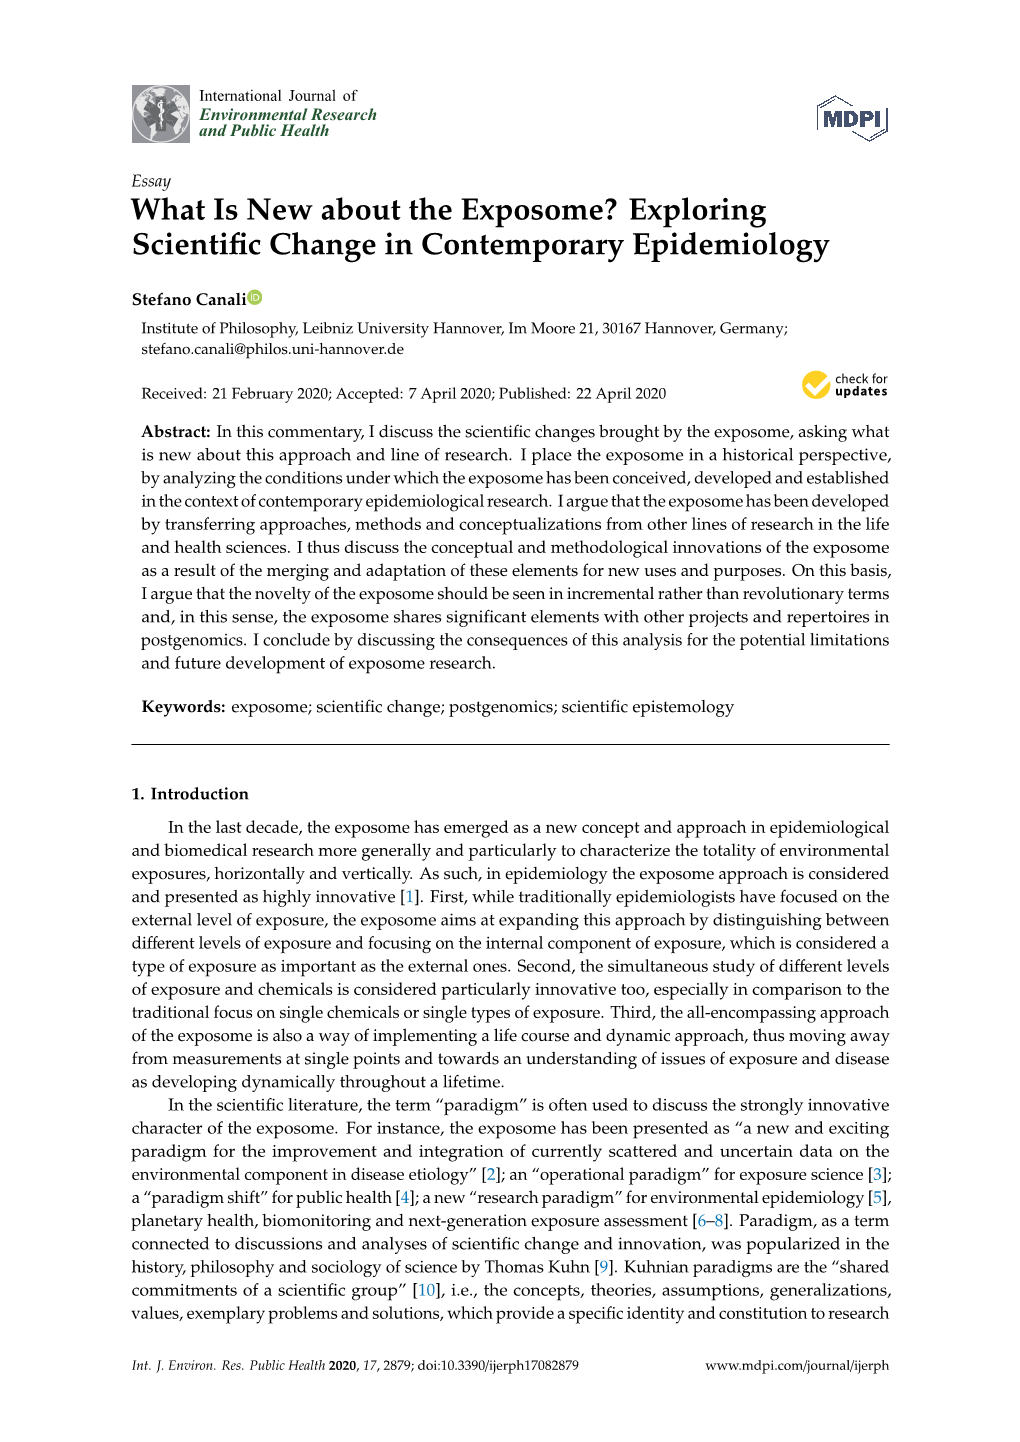 What Is New About the Exposome? Exploring Scientiﬁc Change in Contemporary Epidemiology